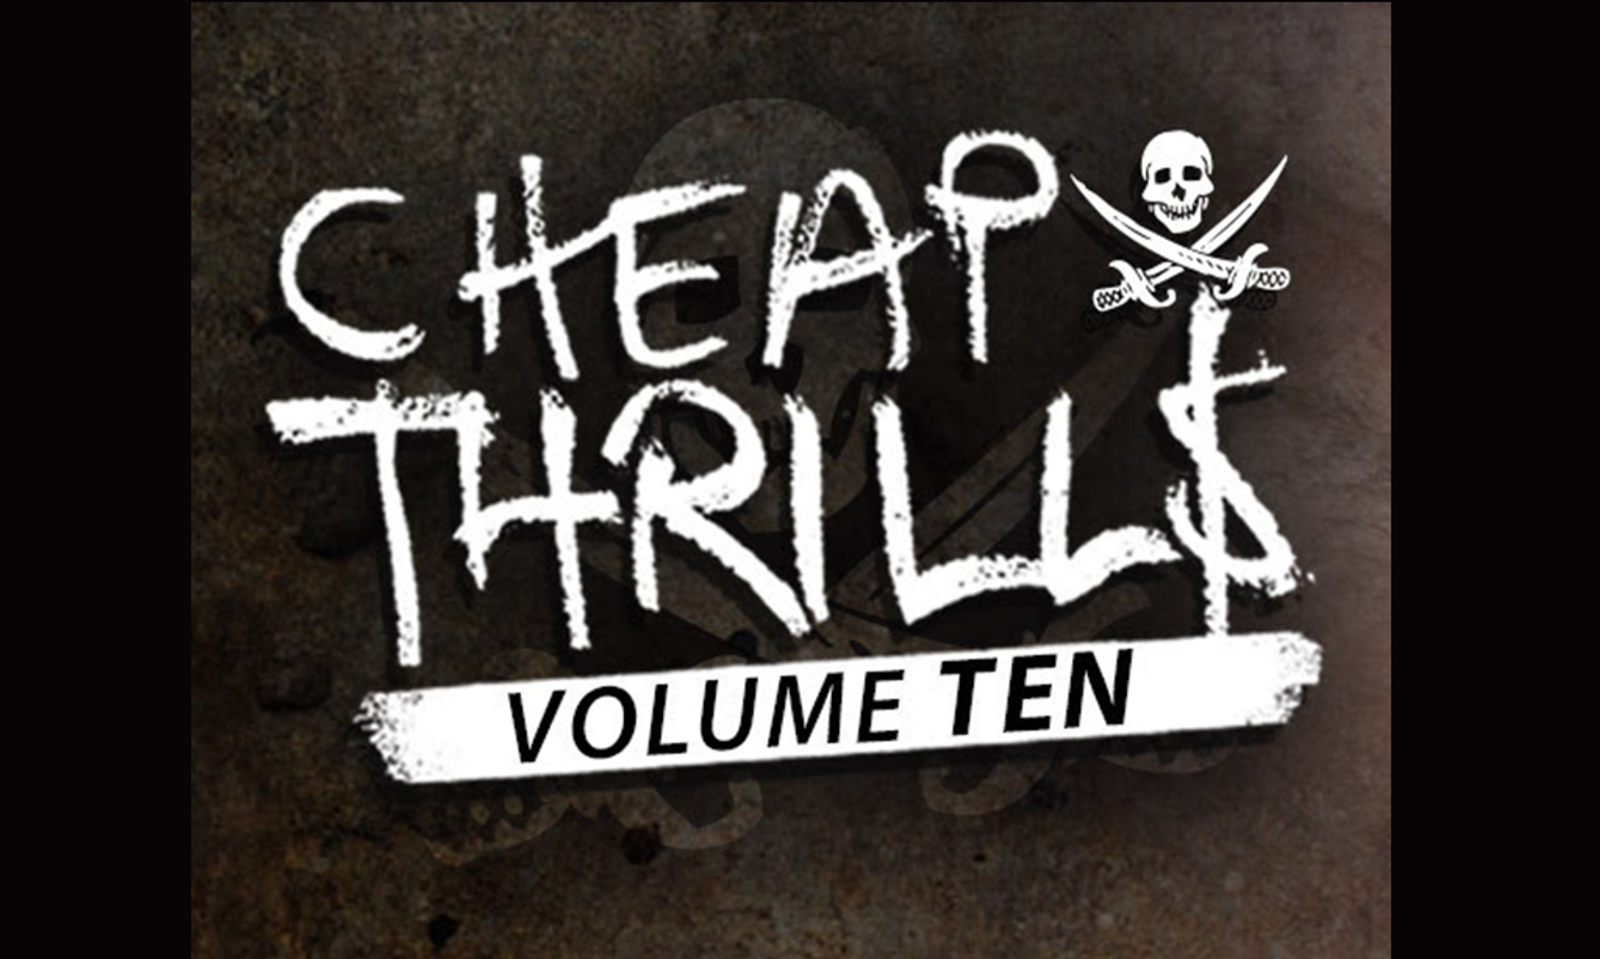 Treasure Island Media Releases Cheap Thrills 10 on DVD, Download